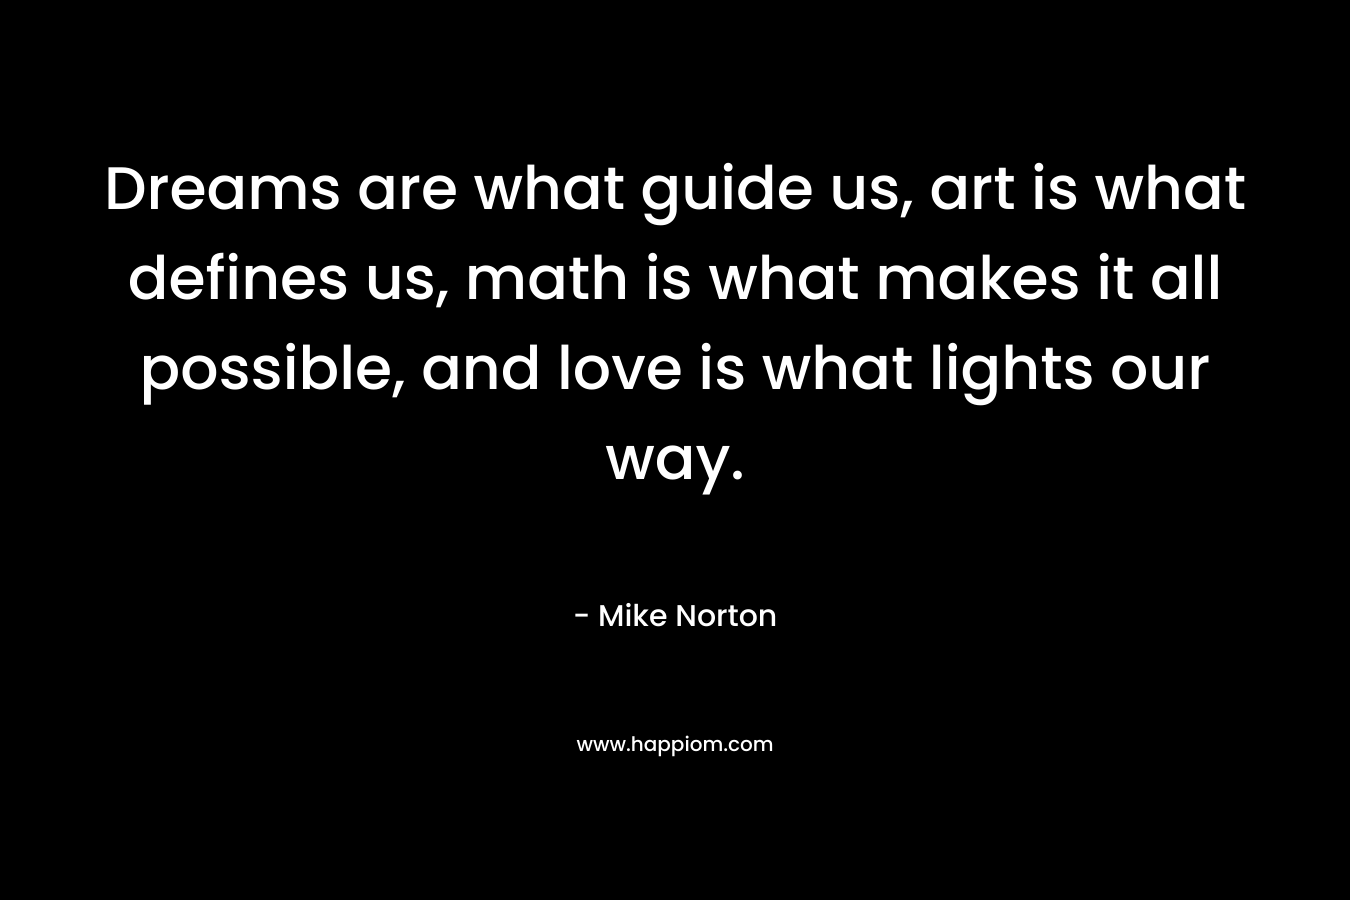 Dreams are what guide us, art is what defines us, math is what makes it all possible, and love is what lights our way. – Mike  Norton